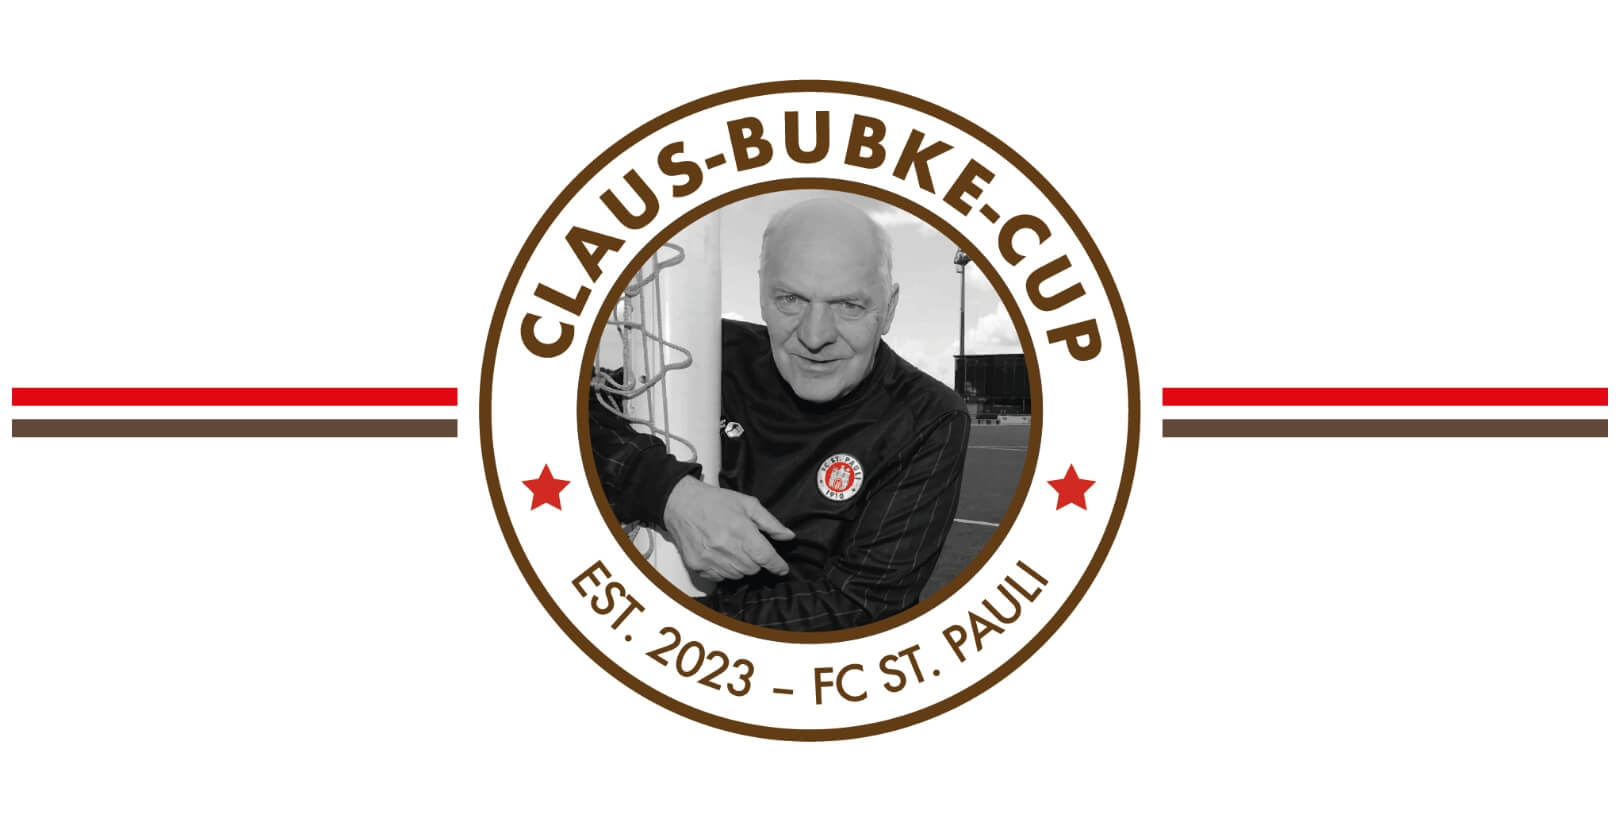 2. Claus-Bubke-Cup